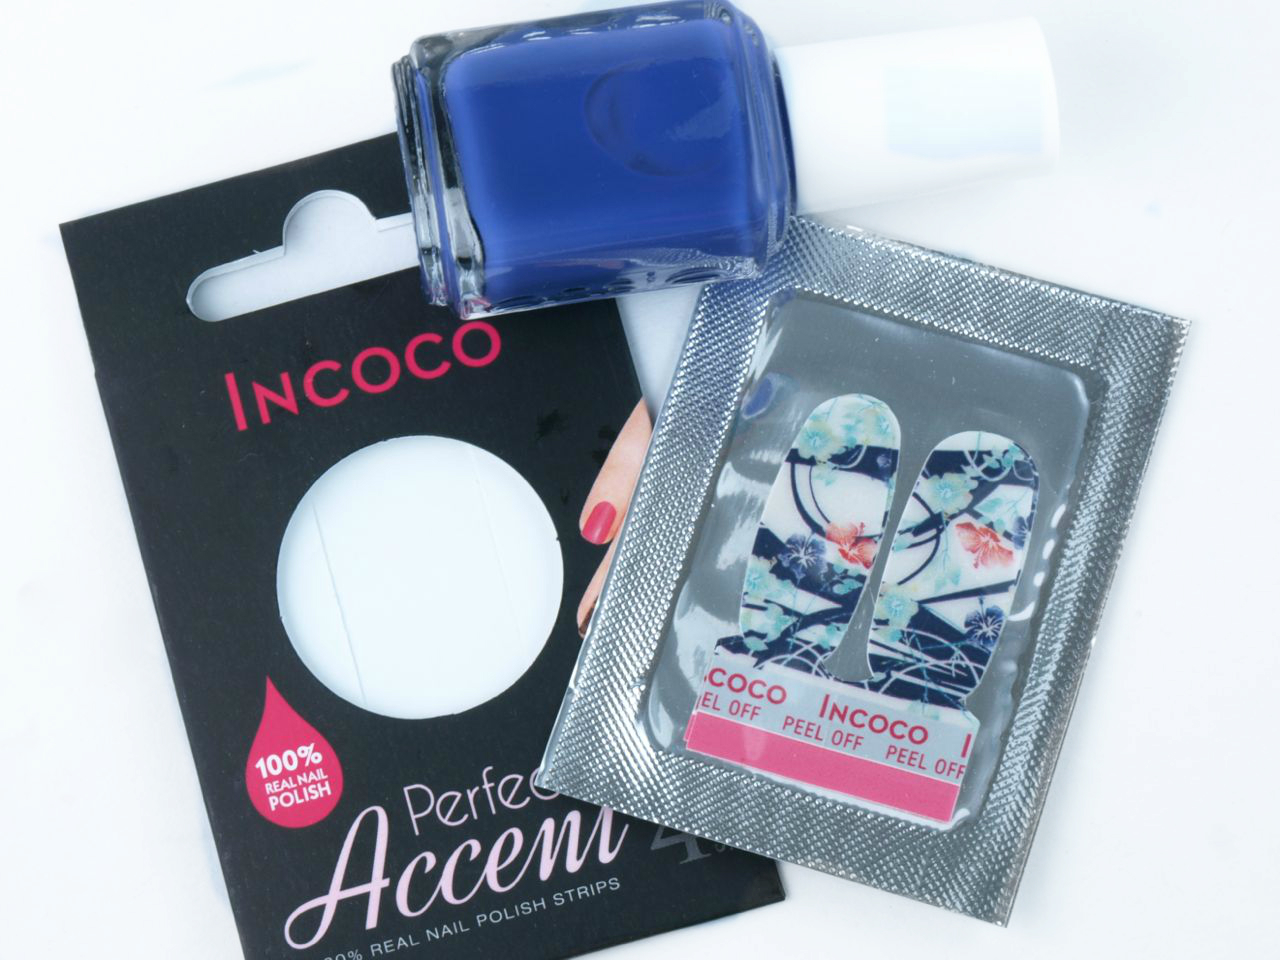 Incoco Perfect Accent Real Nail Polish Strips in "In Paradise": Review and Swatches